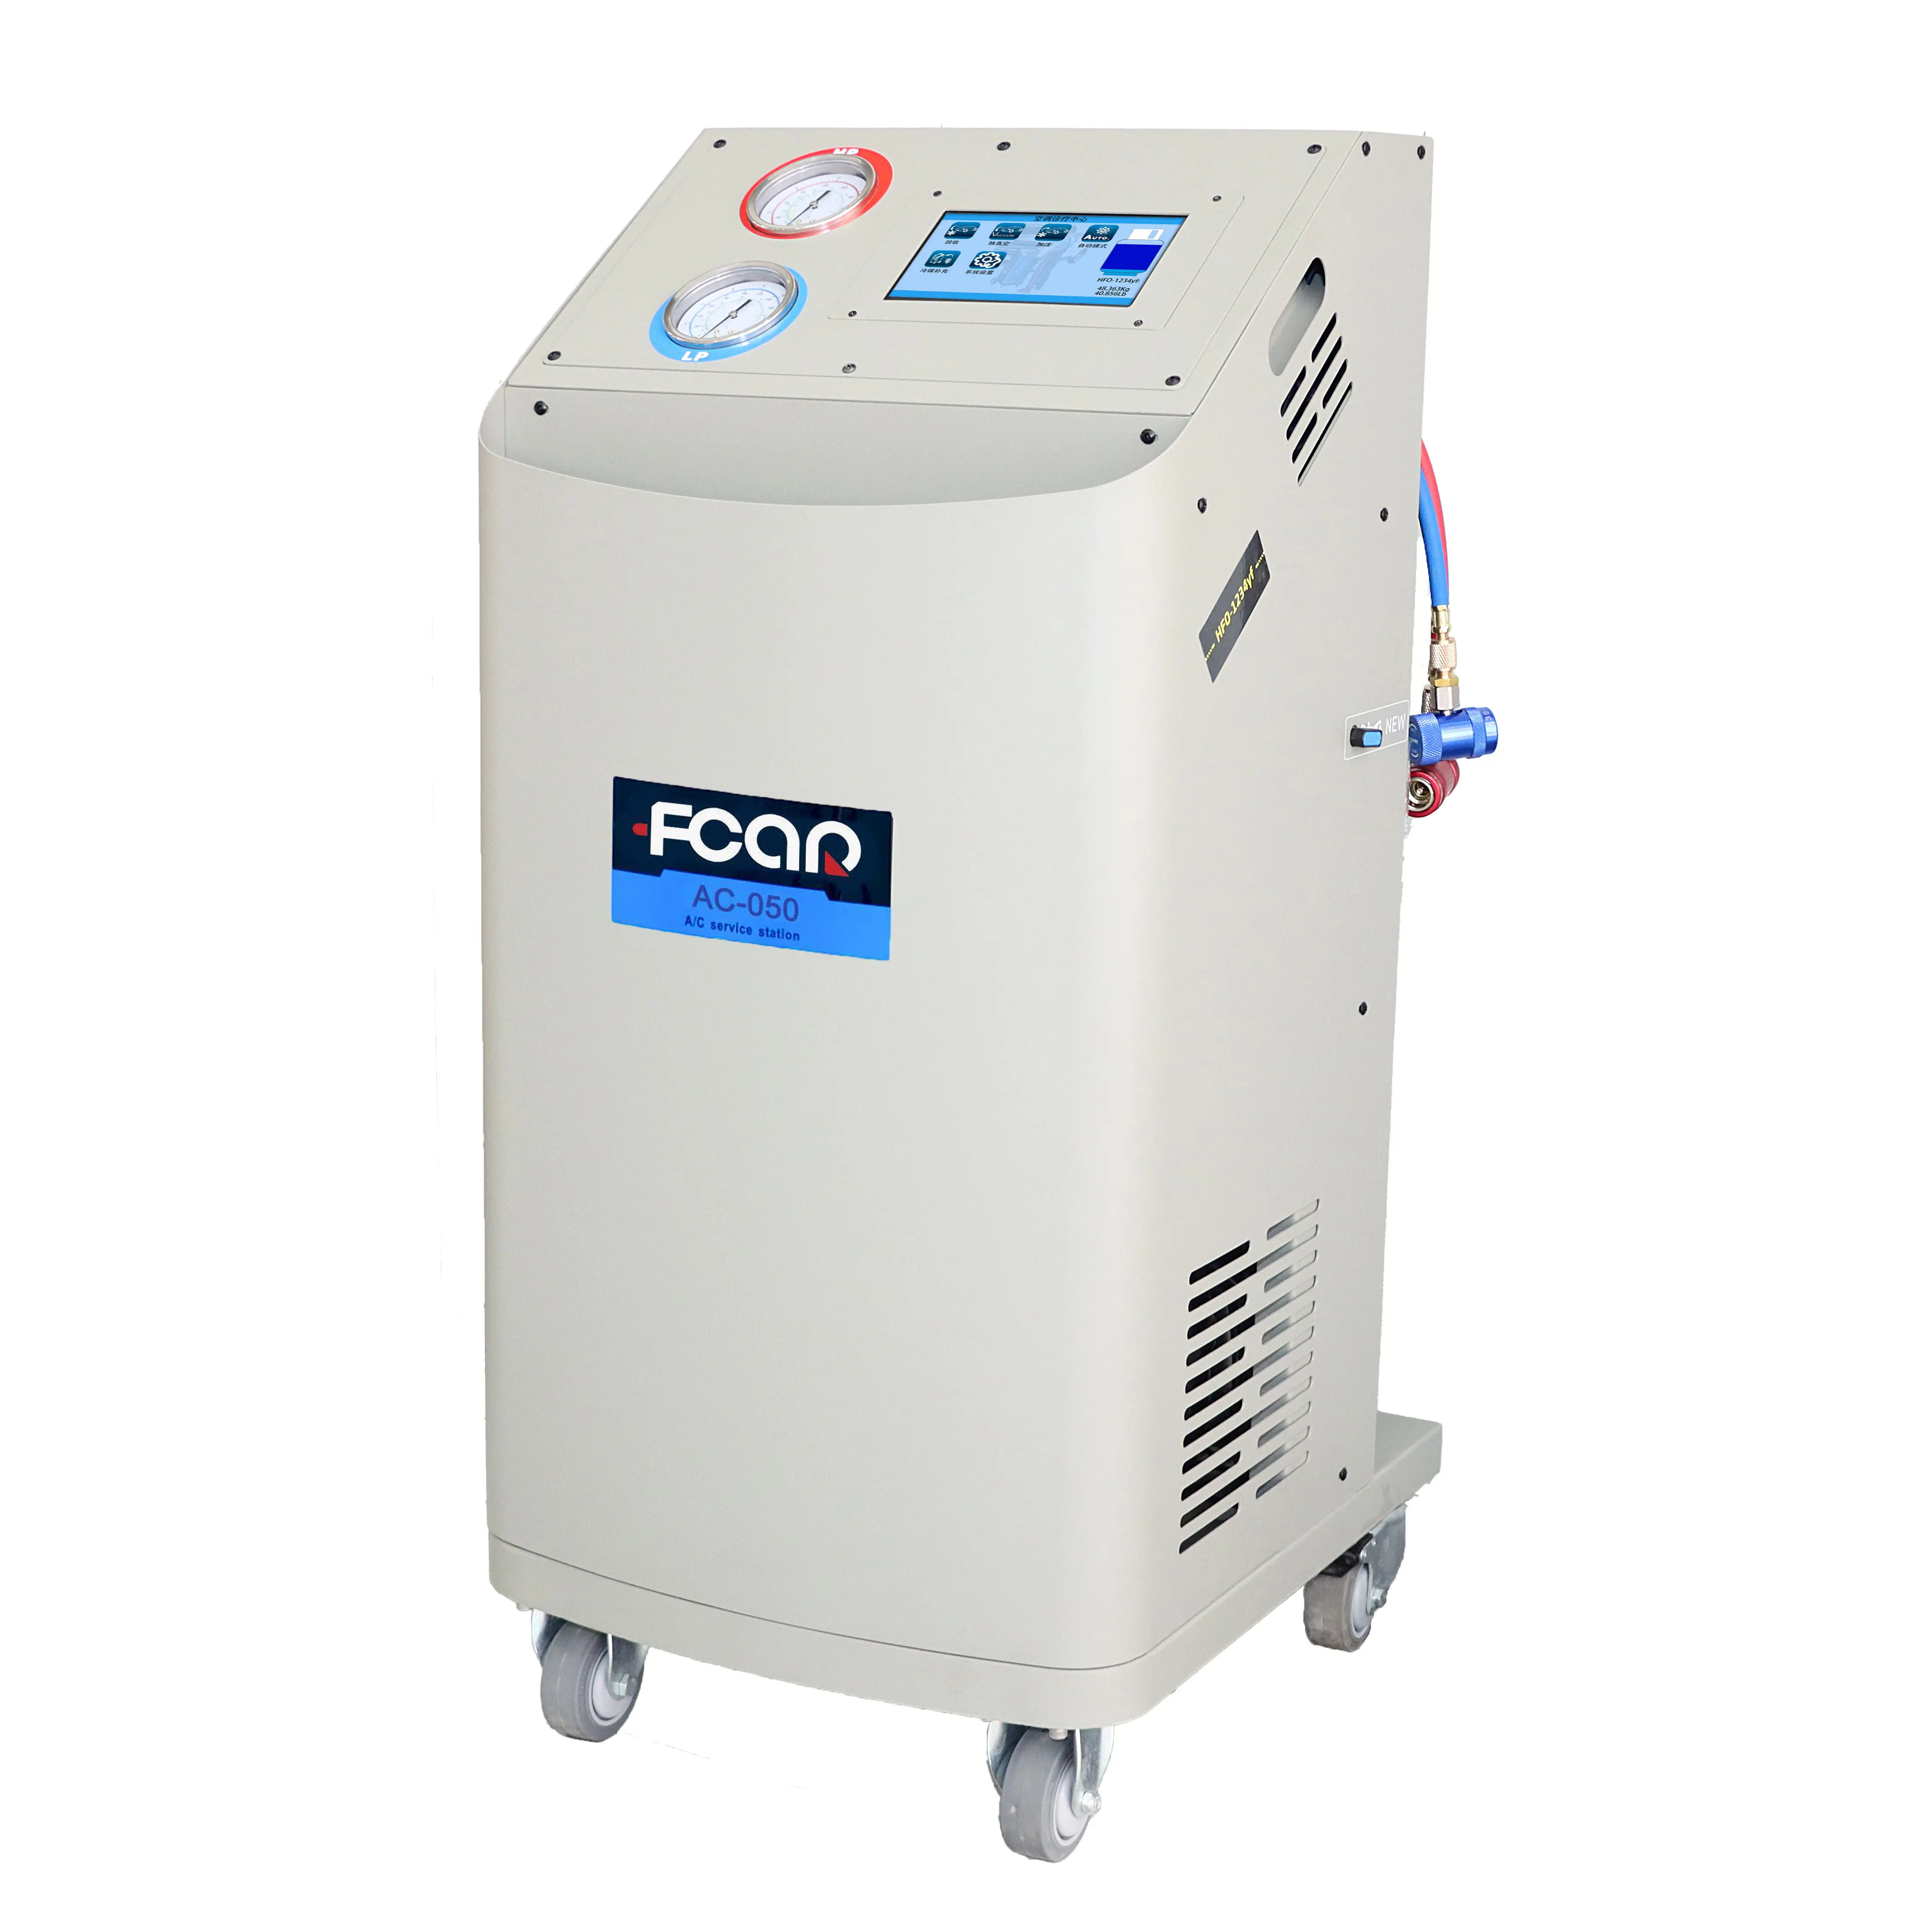 Fcar AC-050 Automatic A/C Refrigerant Machine Fill R134a Gas Support Multi-language Workshop Tools A/C Service Station Low Price